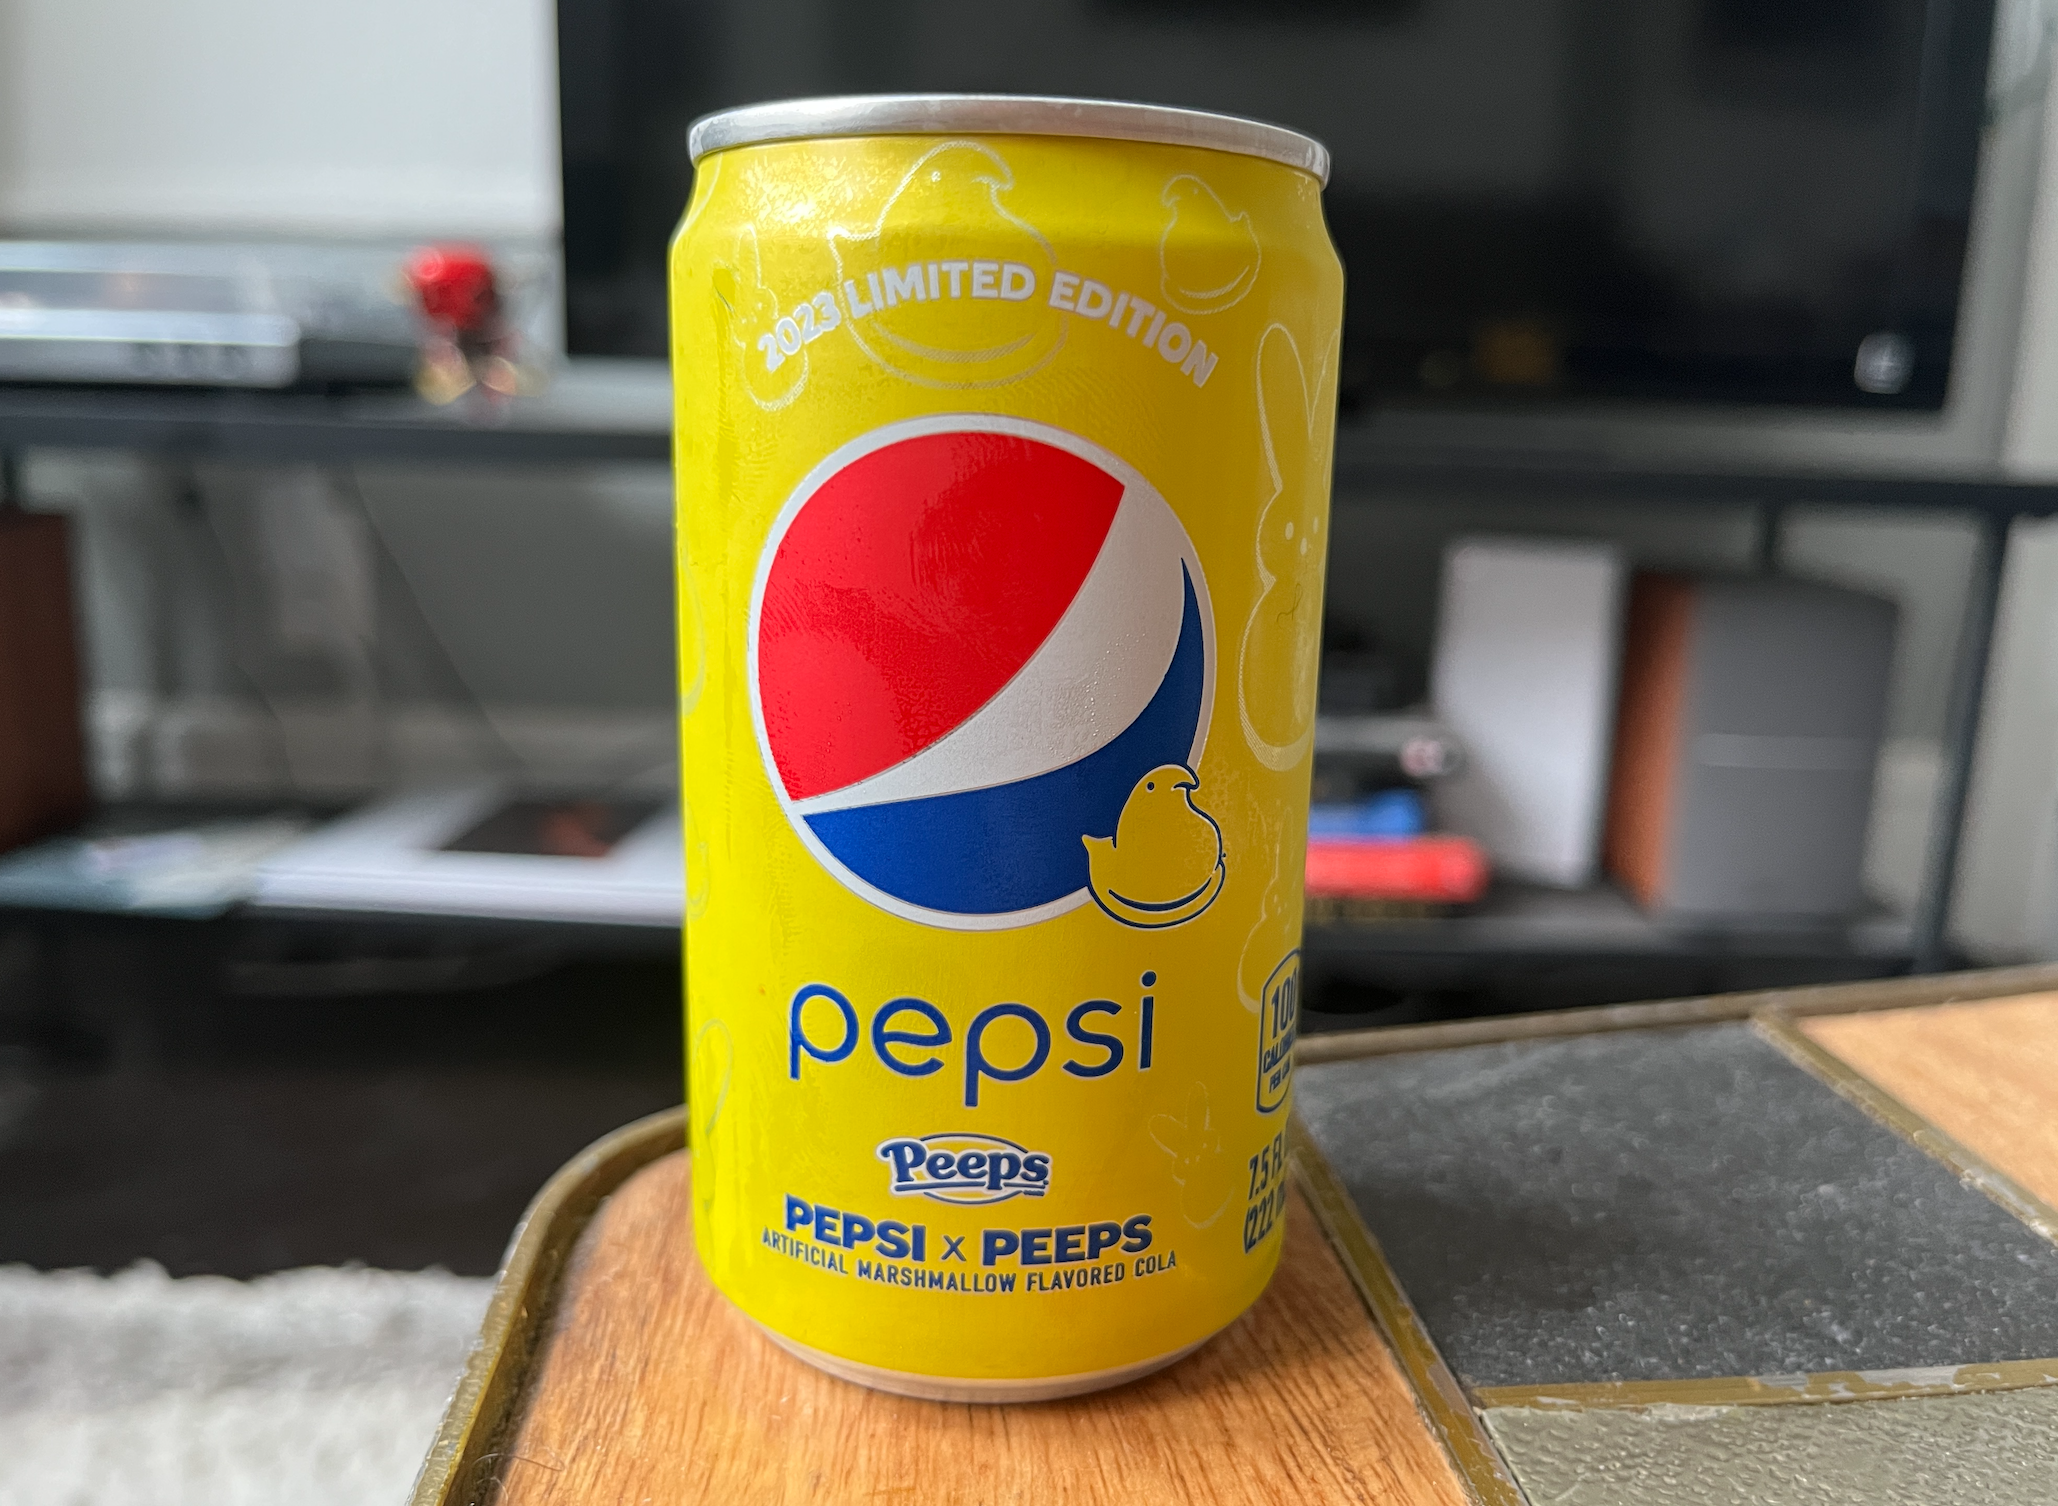 Limited edition Pepsi flavor being offered exclusively at Little Caesars  this summer